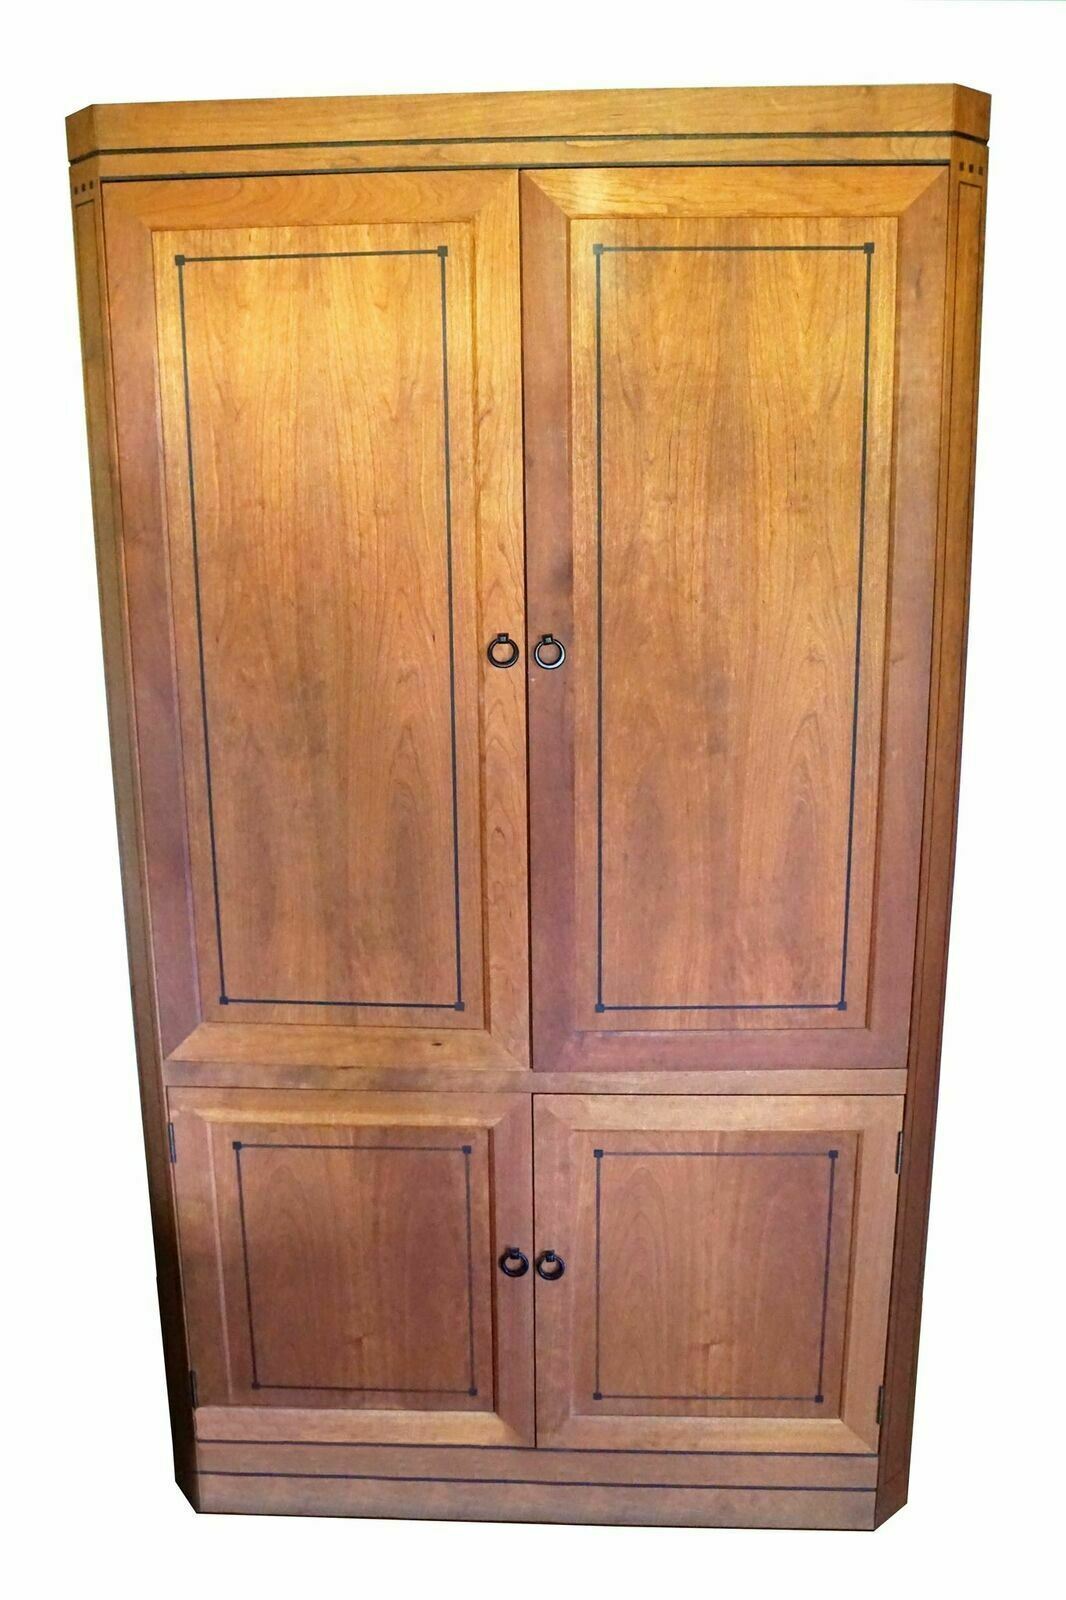 Stickley Arts & Crafts Mission Cherry Wood Television Cabinet Armoire